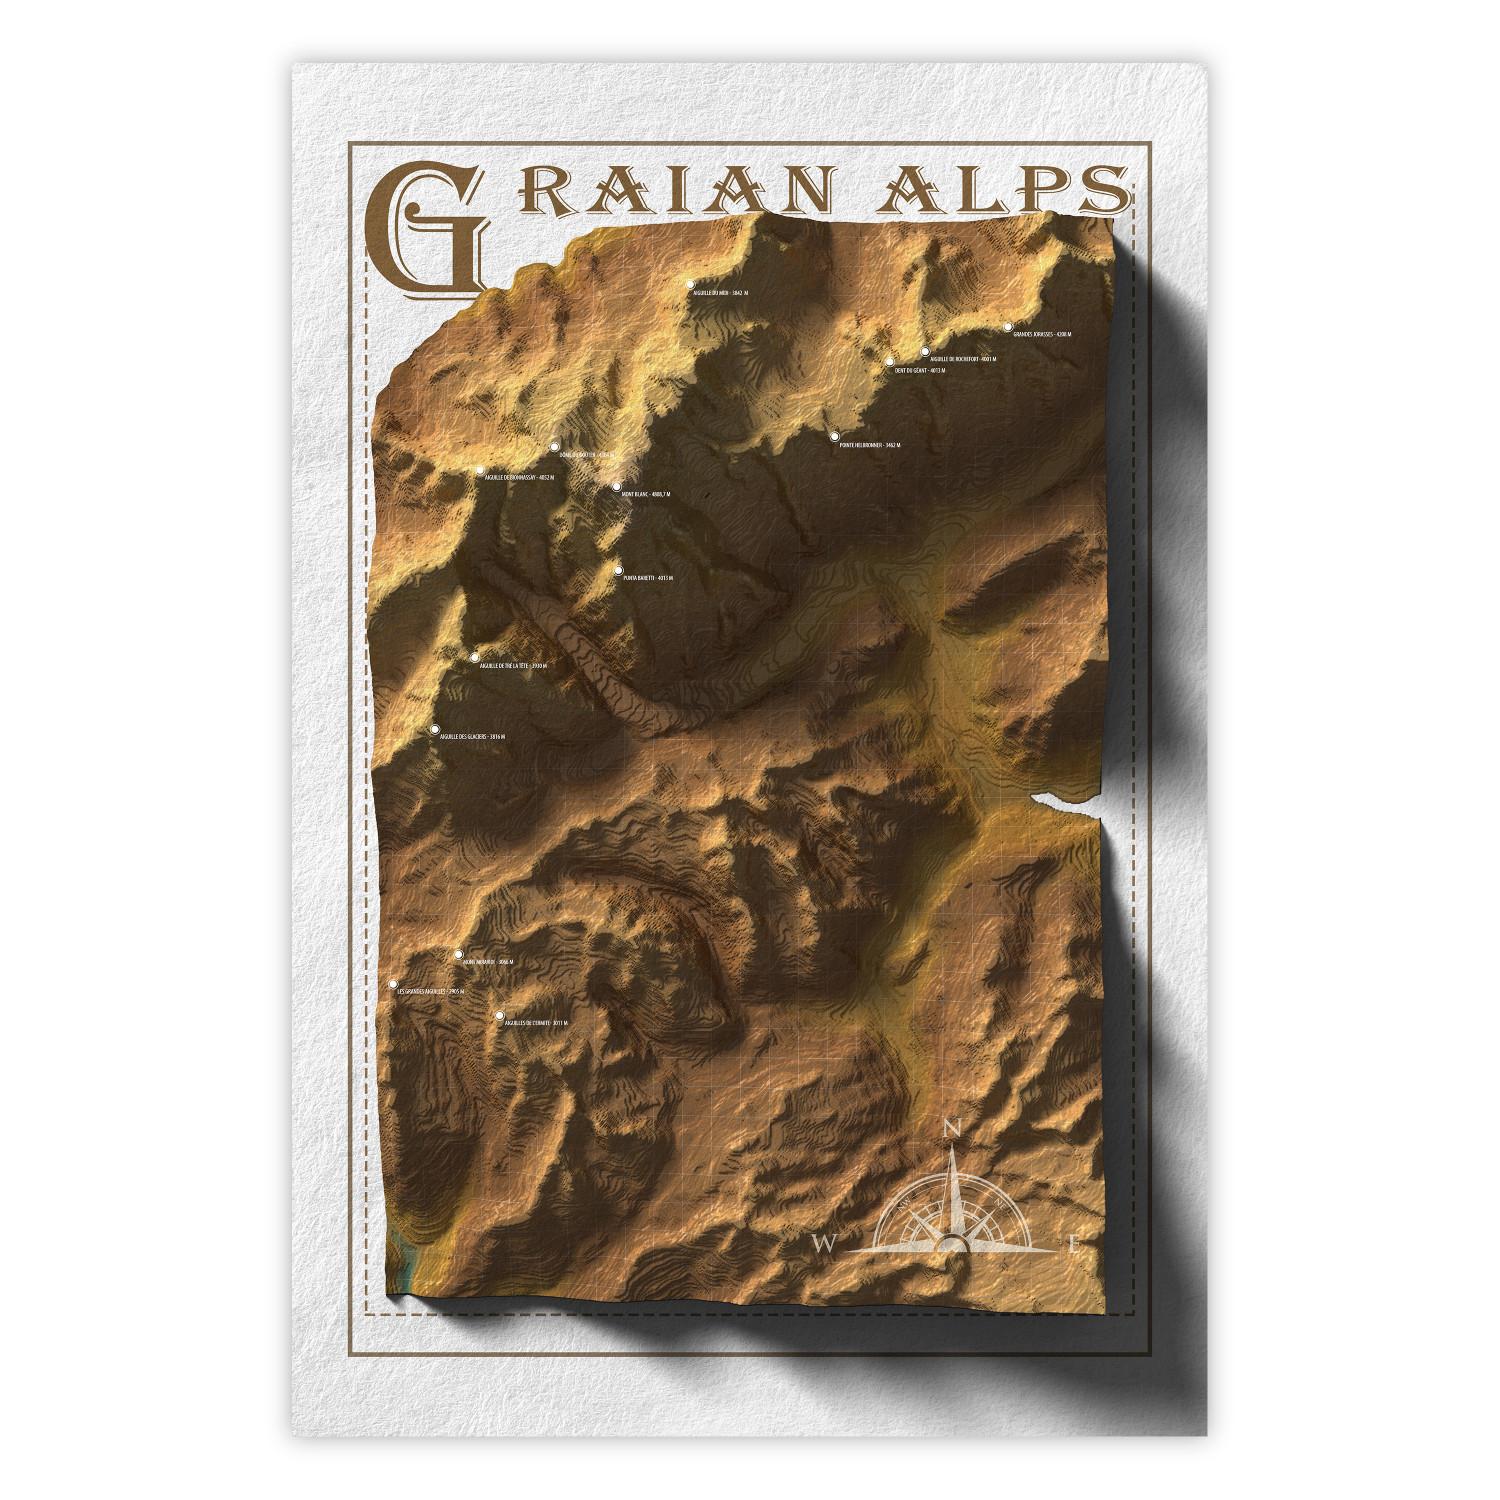 Poster Isometric Map: Graian Alps [Poster]